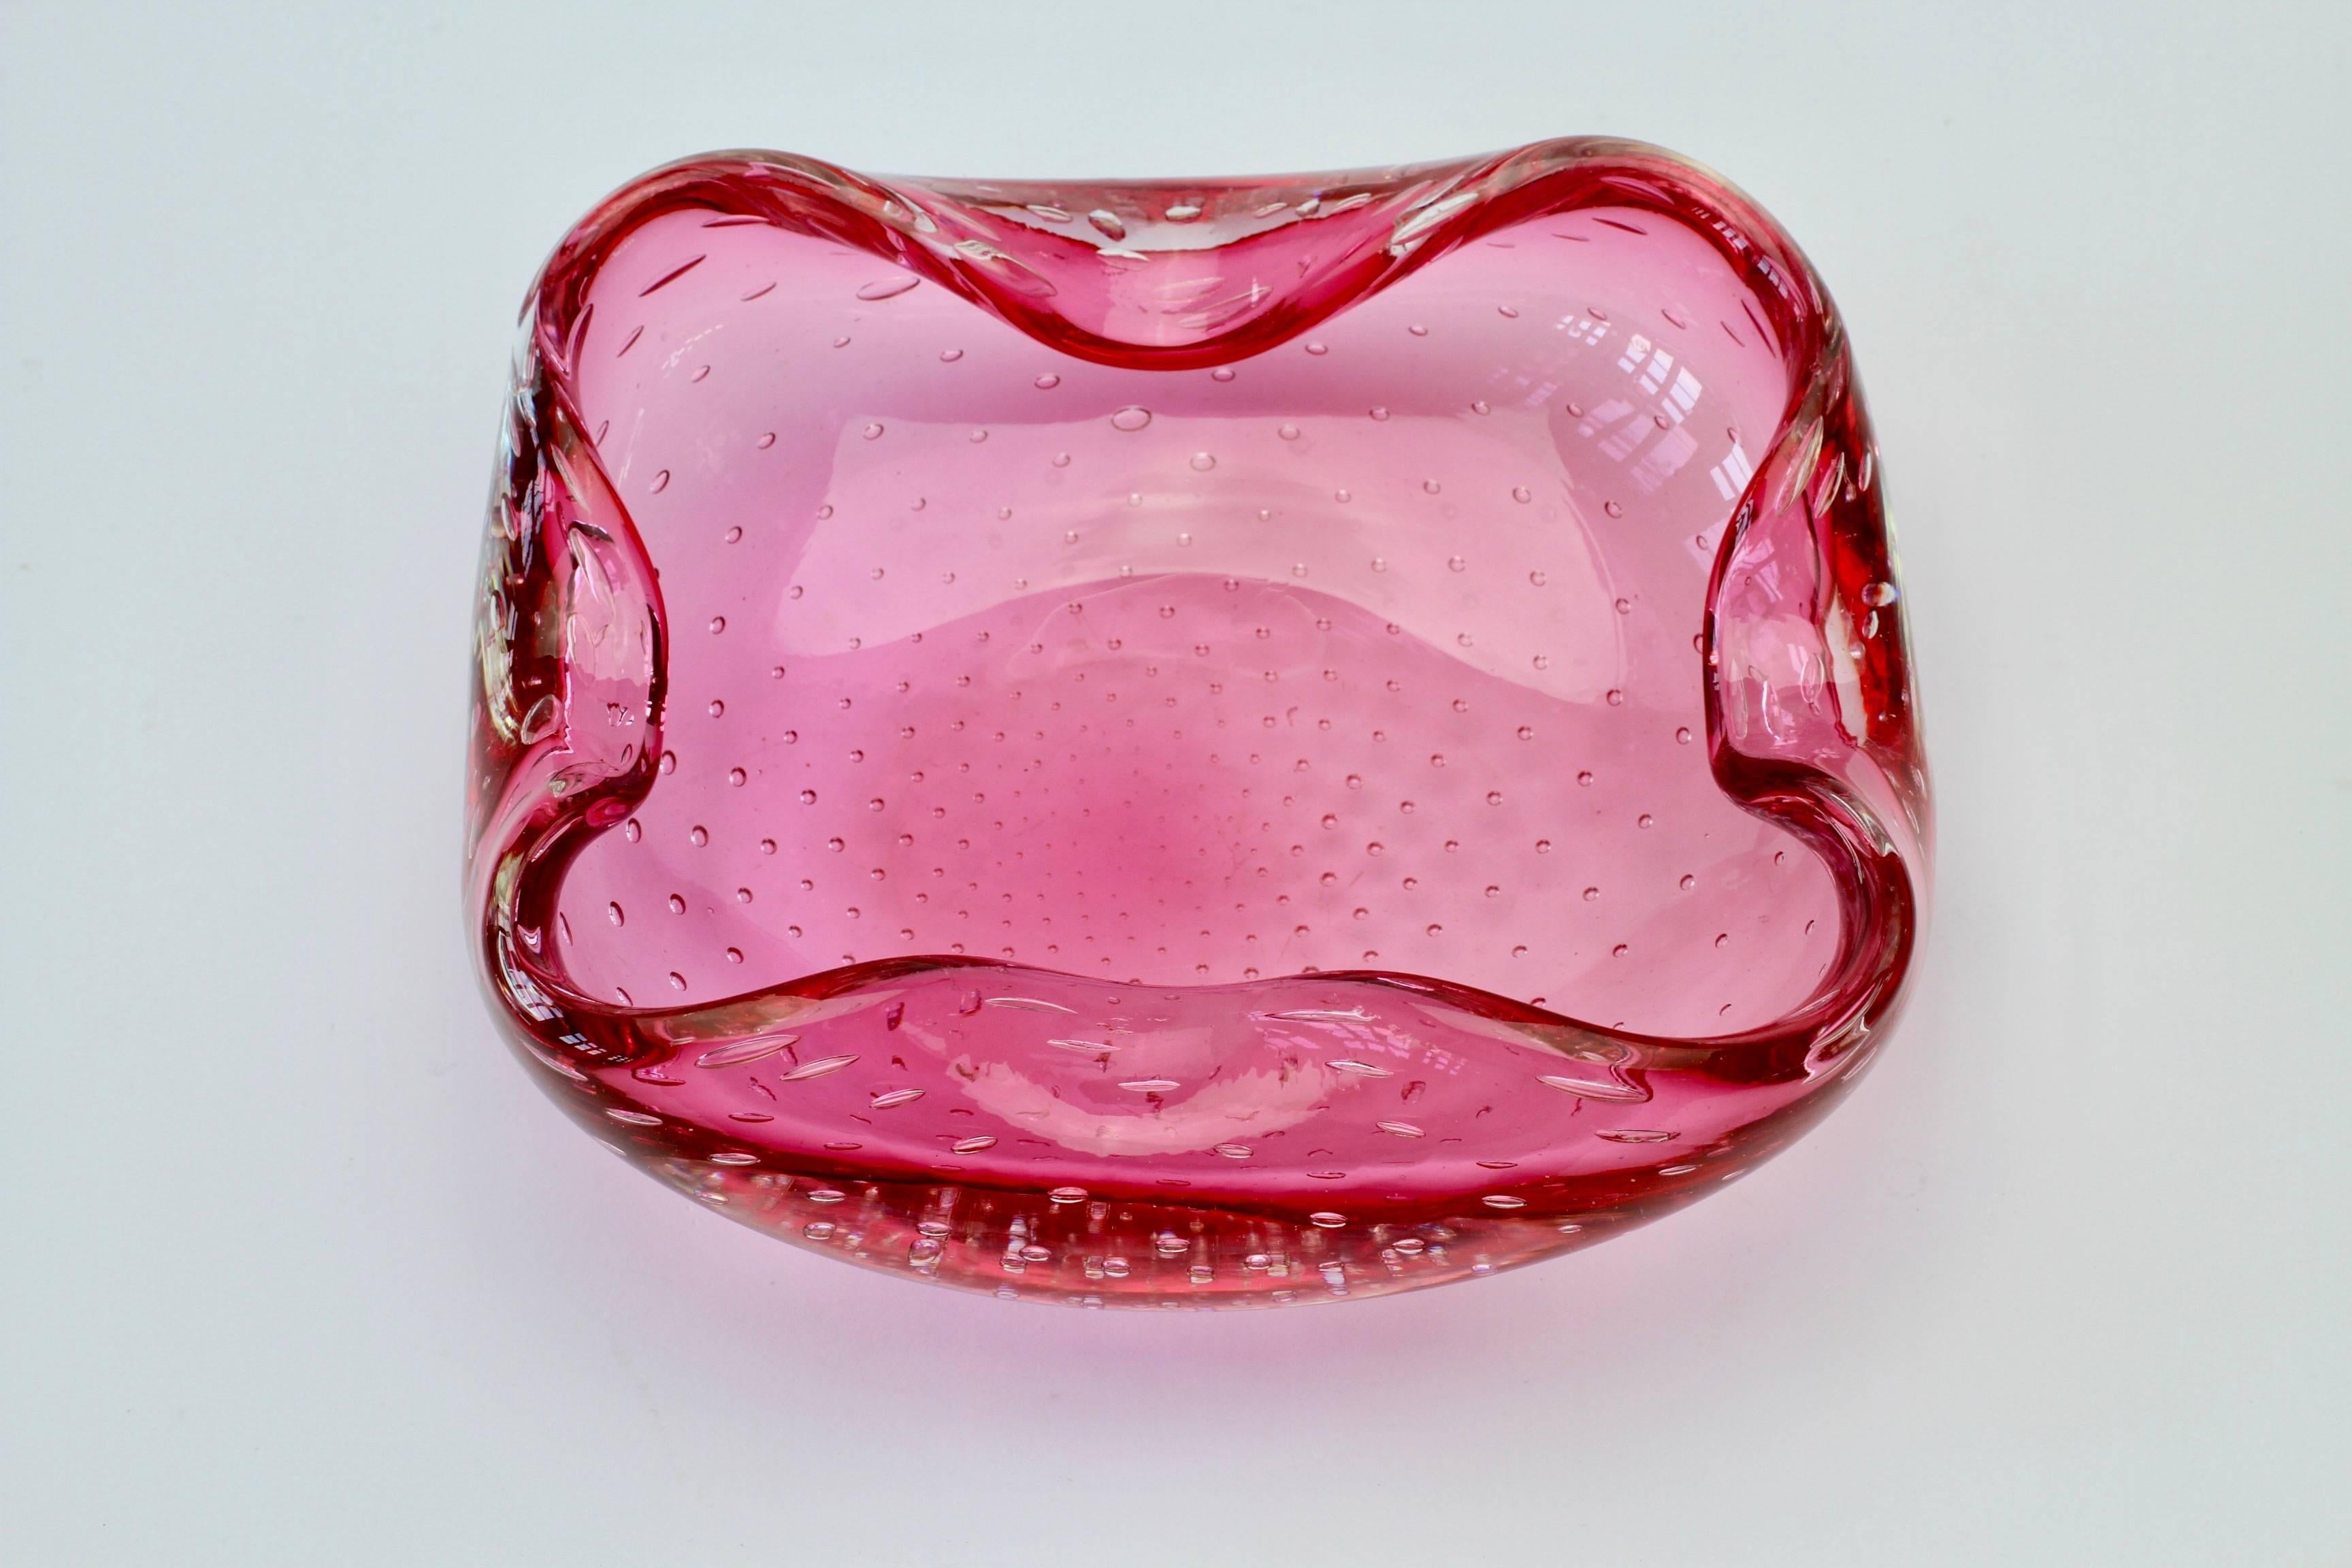 A beautiful large vintage rectangular biomorphic shaped pink glass 'Bullicante' (controlled bubble) bowl or ashtray with folded rims. In the style of Murano glass designer Carlo Scarpa for Venini, circa 1950. A very beautiful centrepiece.